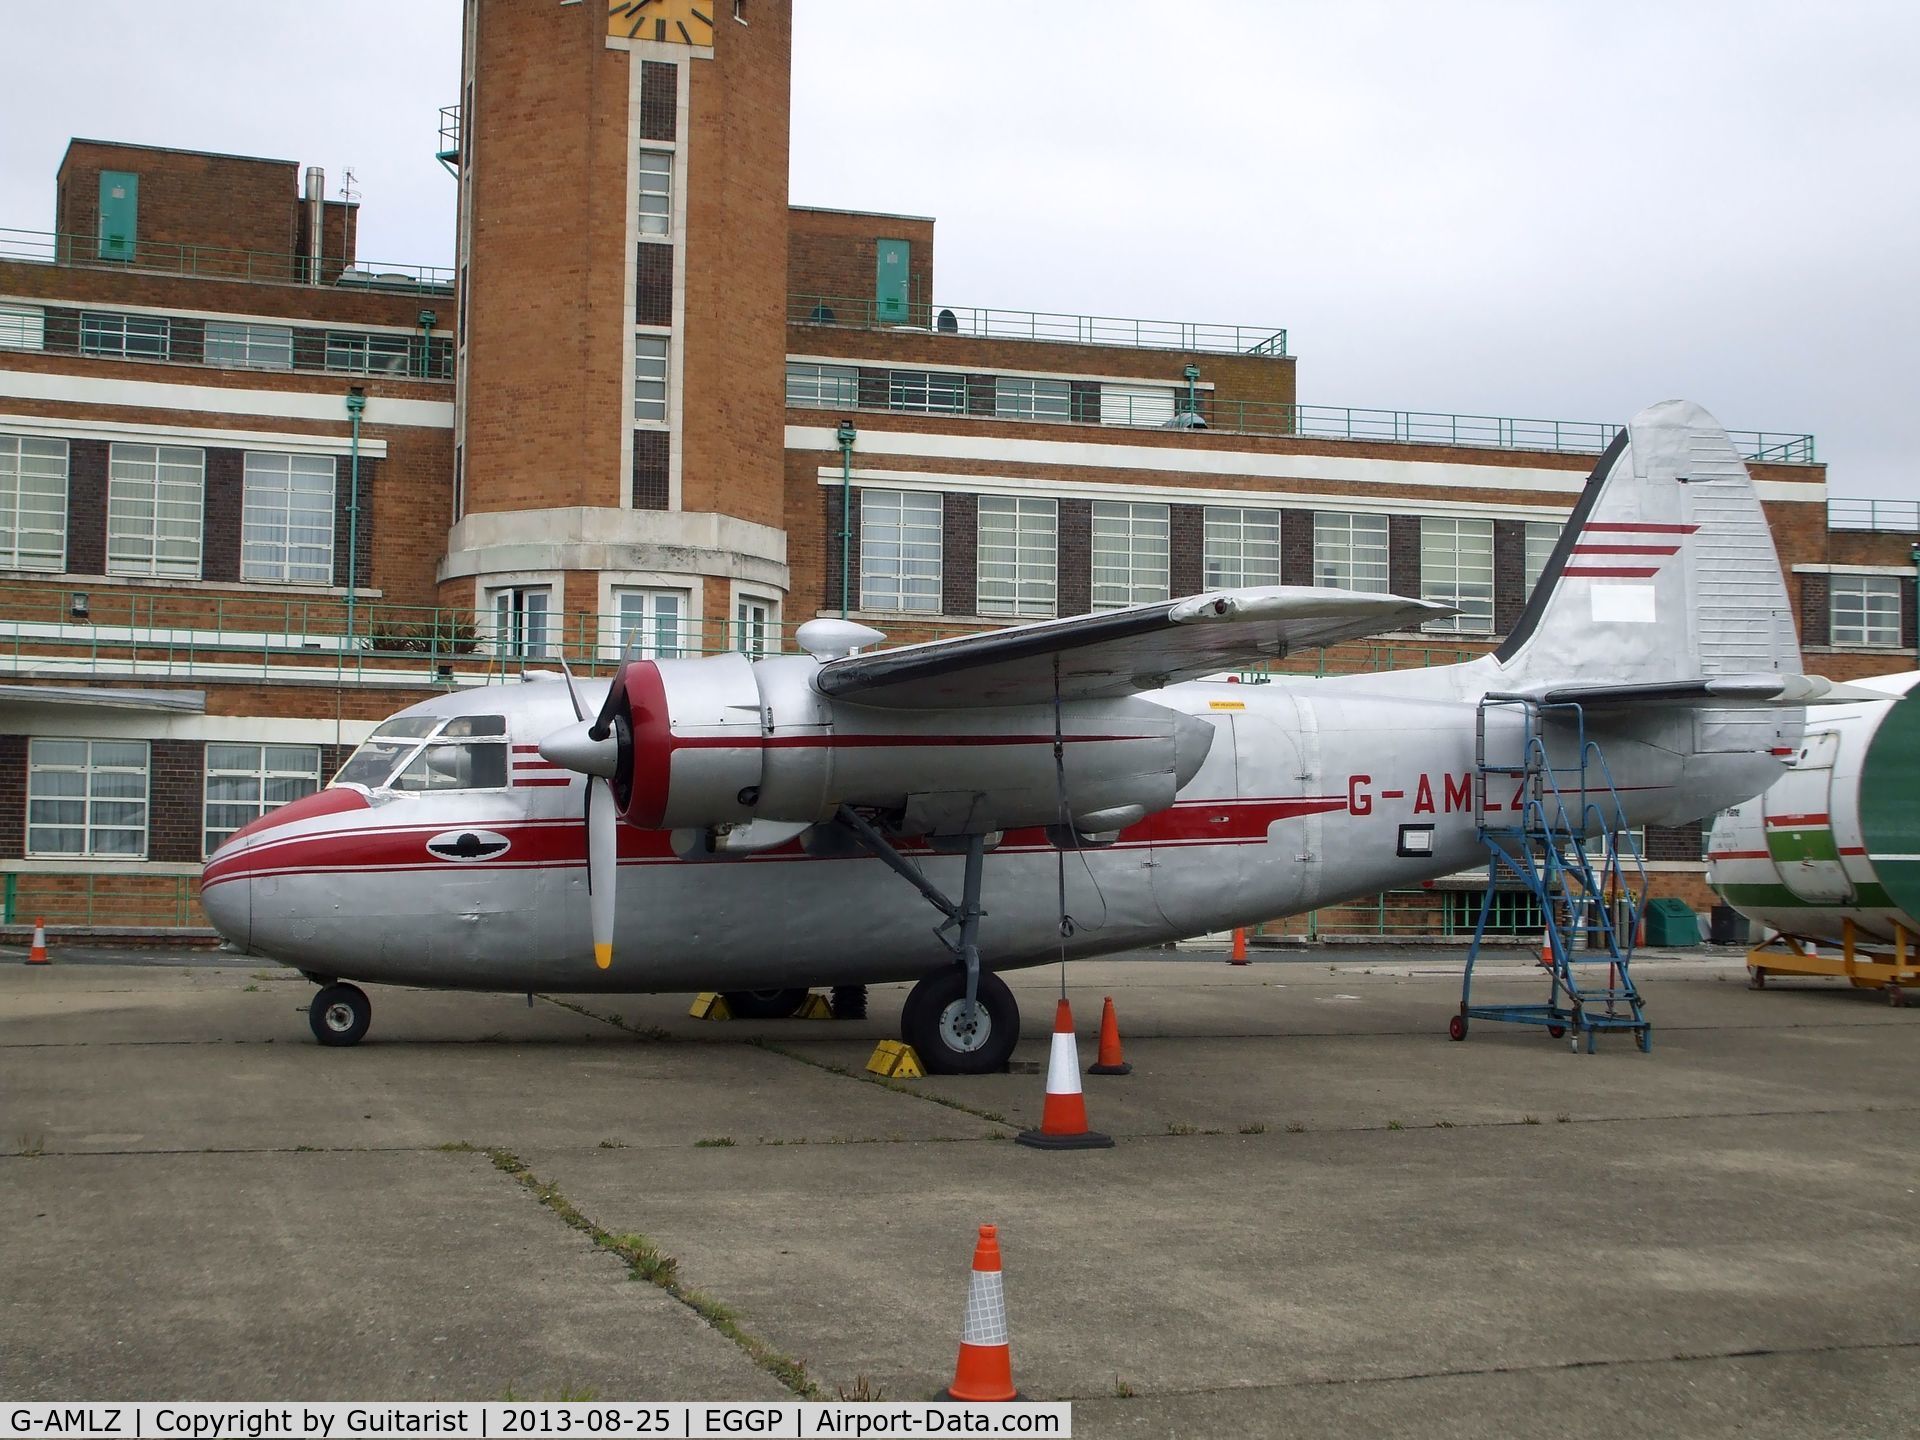 G-AMLZ, Percival P-50 Prince 6E C/N P50-46, On the apron at the old Liverpool airport which is now a hotel